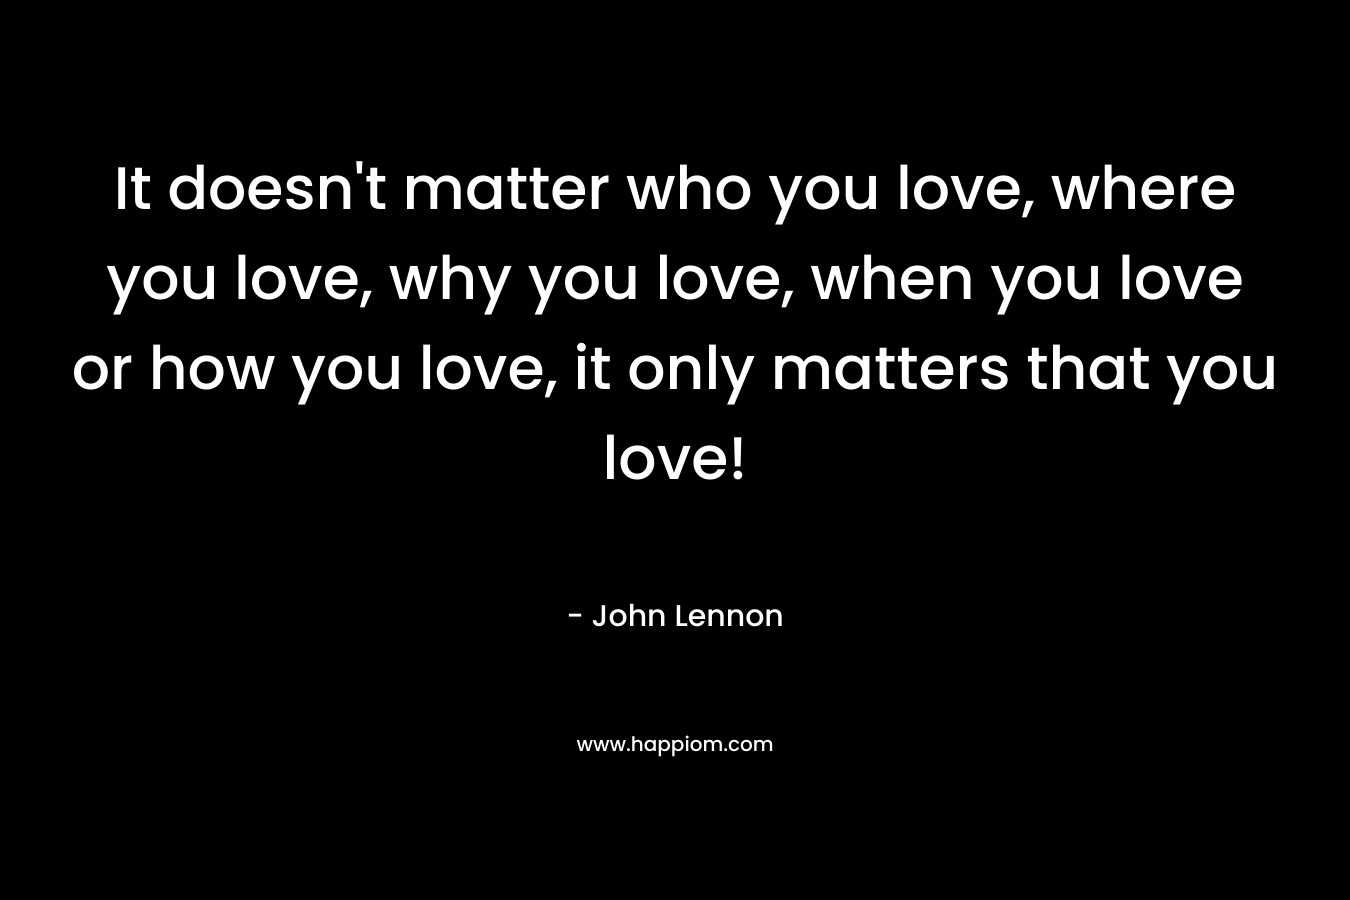 It doesn’t matter who you love, where you love, why you love, when you love or how you love, it only matters that you love! – John Lennon